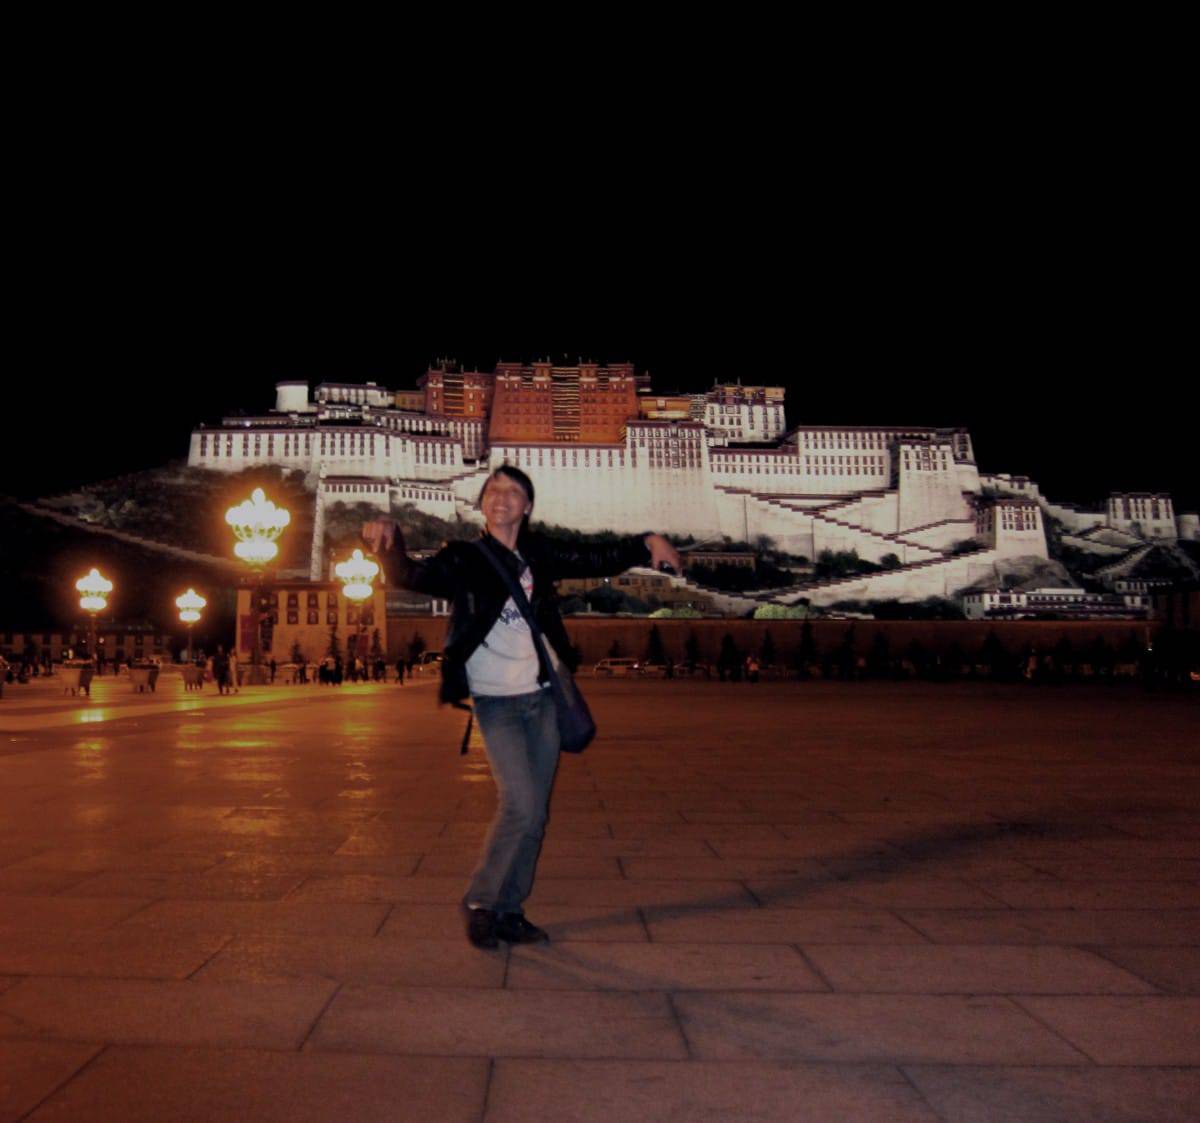 Lhamo dancing in Lhasa, in front of the Potala Palace